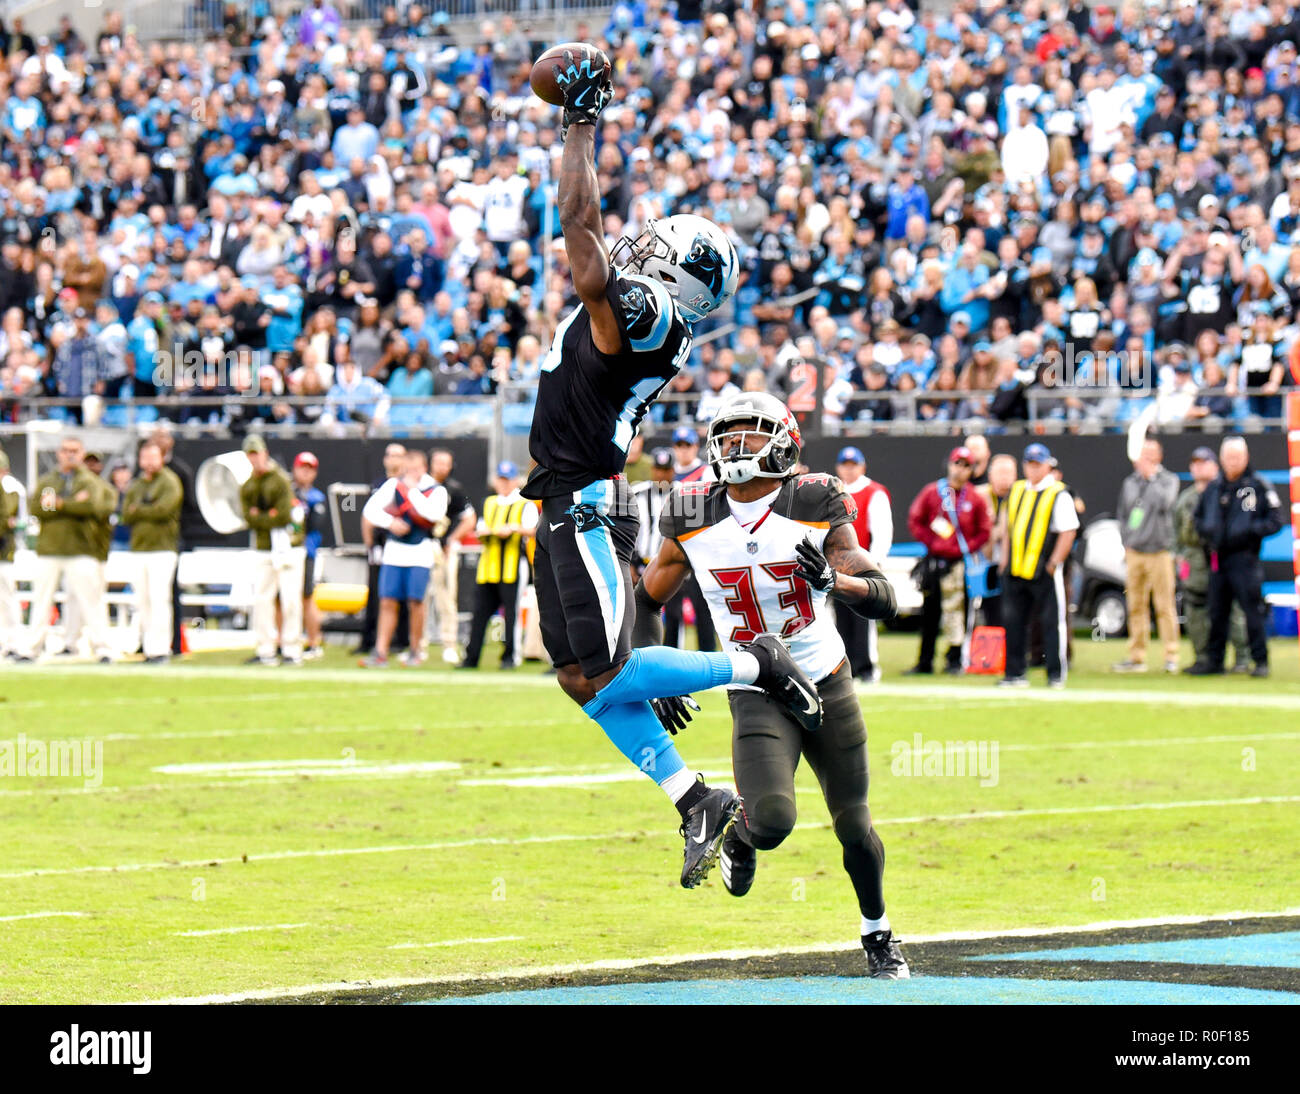 Charlotte, North Carolina, USA. 4th Nov, 2018. Carolina Panthers wide receiver CURTIS SAMUEL (10) scores a late game touchdown against the Tampa Bay Buccaneers at Bank of America Stadium. Credit: Ed Clemente/ZUMA Wire/Alamy Live News Stock Photo